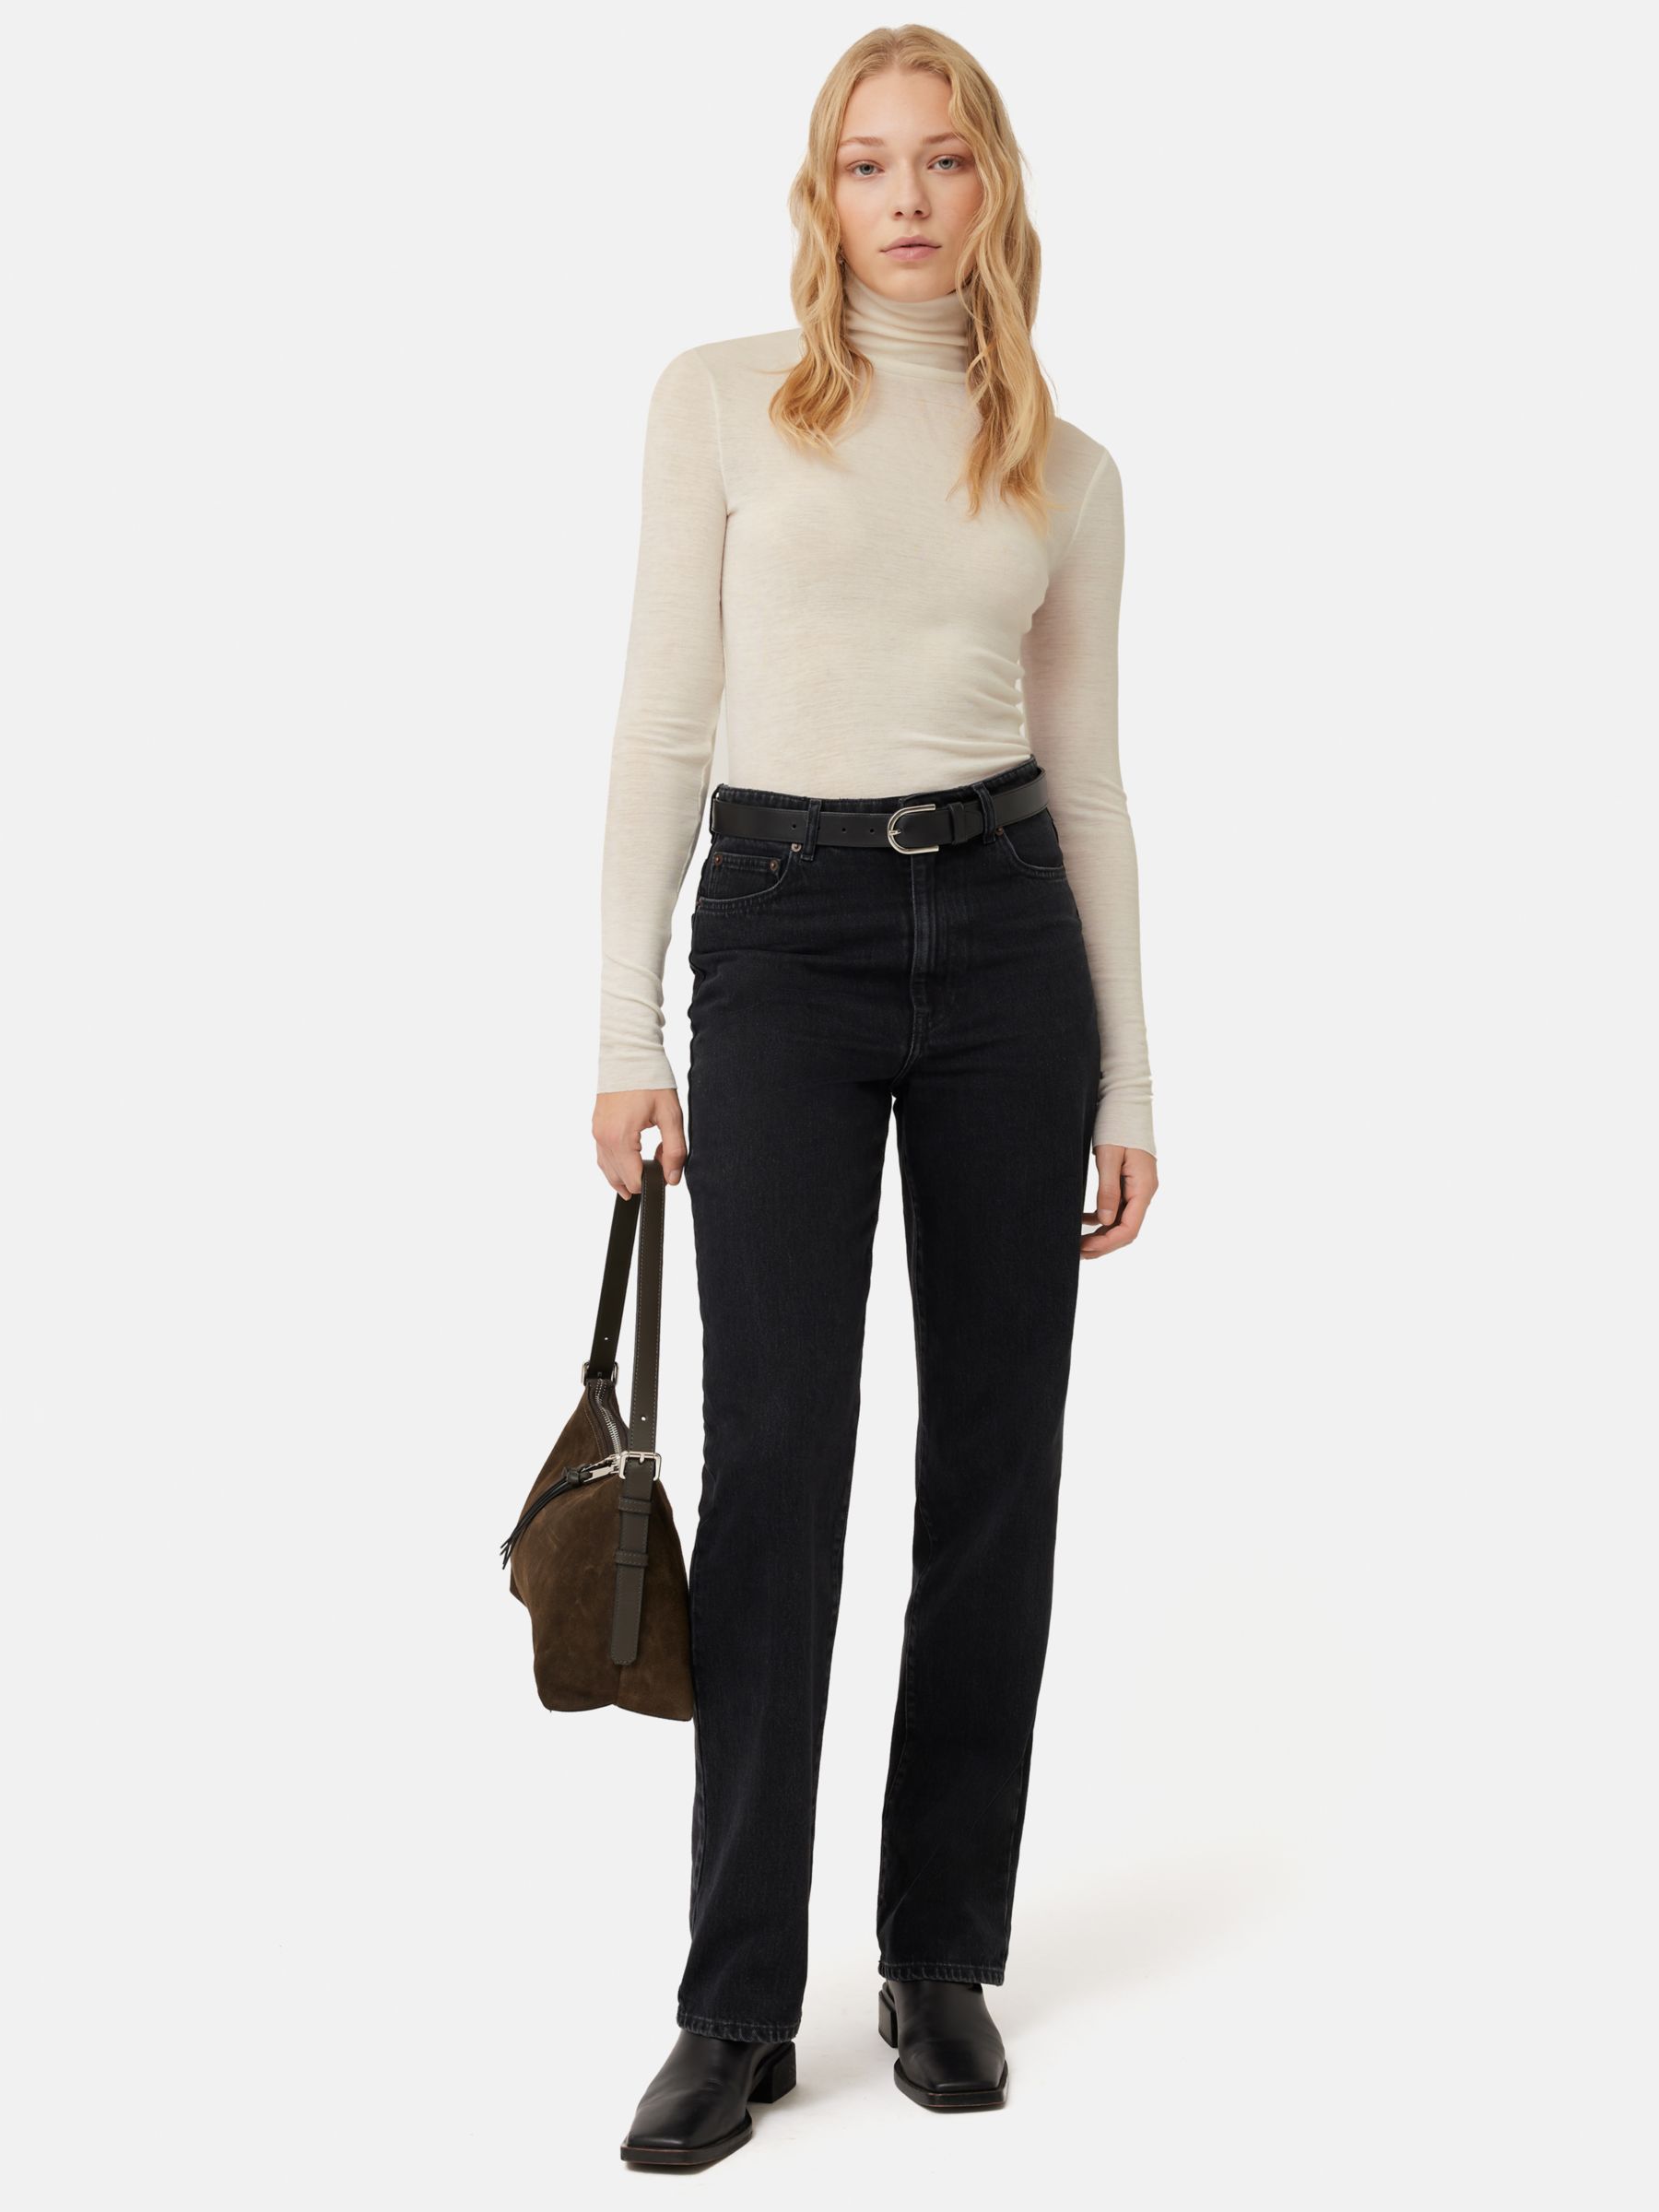 Jigsaw Wool Jersey Polo Neck Top, Cream at John Lewis & Partners